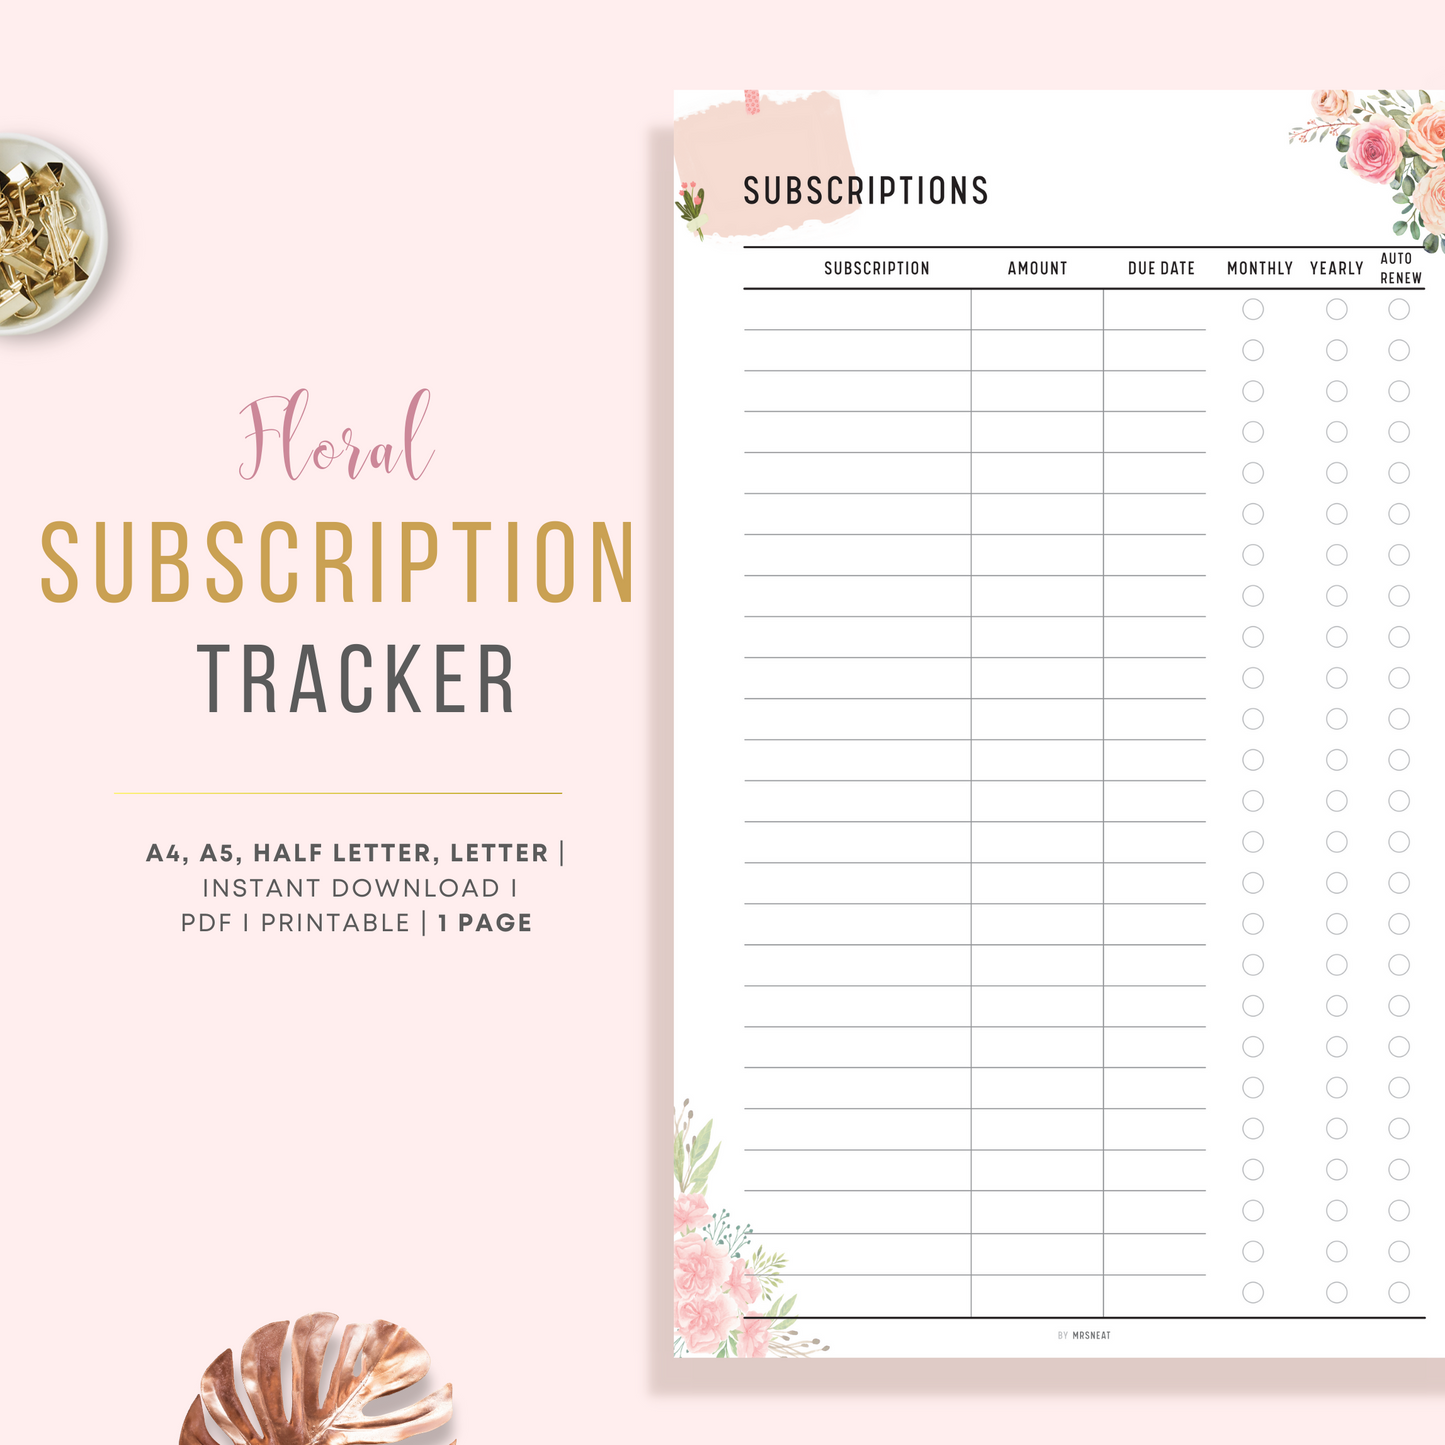 Cute and Beautiful Floral Subscription Tracker Planner Printable